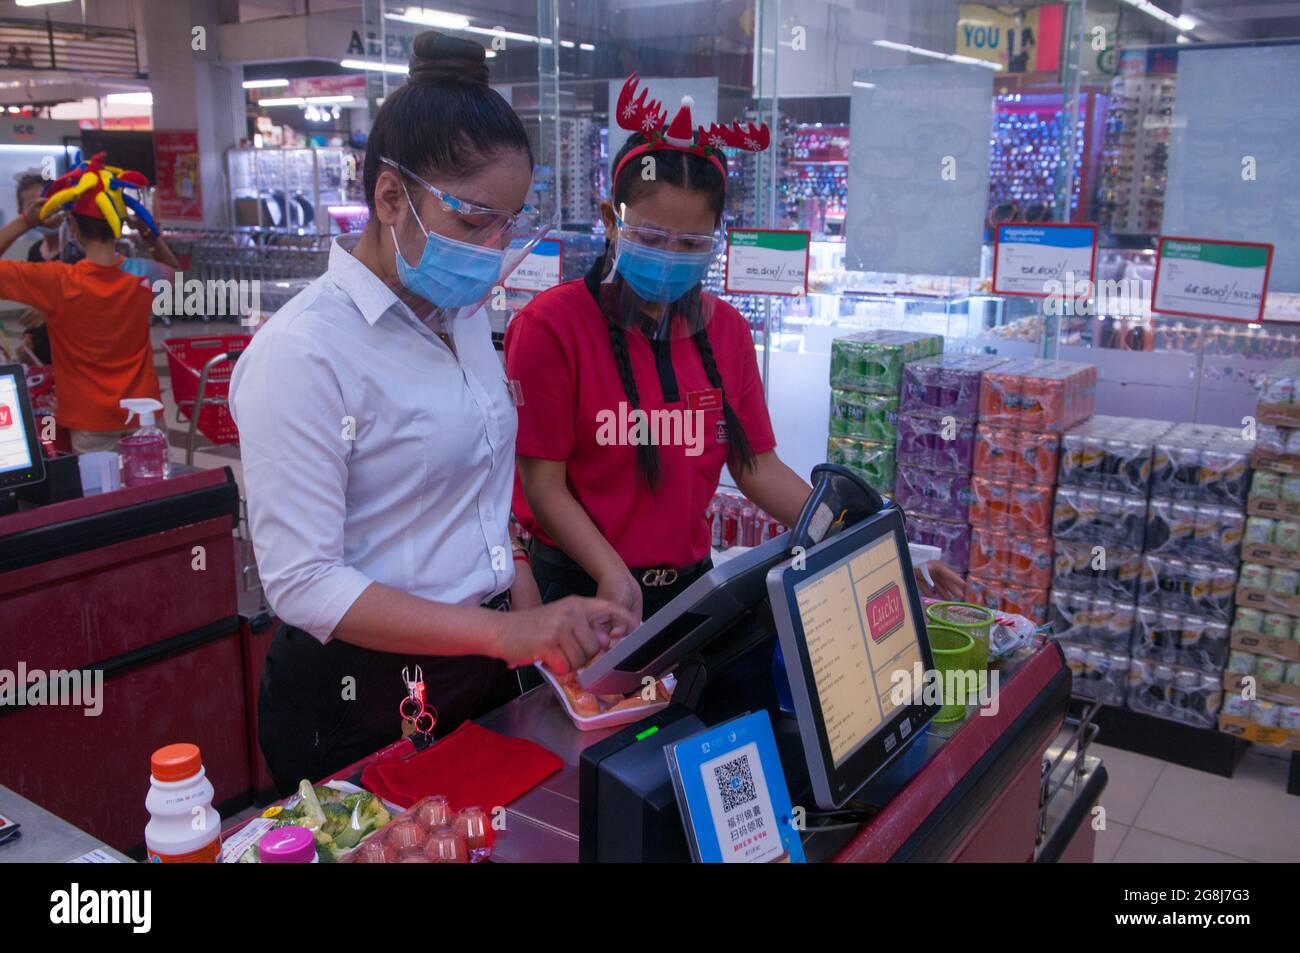 during the Christmas holidays with an outbreak of COVID - 19, two Cambodian female cashiers, wearing protective plastic face shields & masks, scan groceries at a grocery store checkout counter during the coronavirus pandemic. Steung Meanchey, Phnom Penh, Cambodia. Dec. 23rd, 2020. © Kraig Lieb Stock Photo